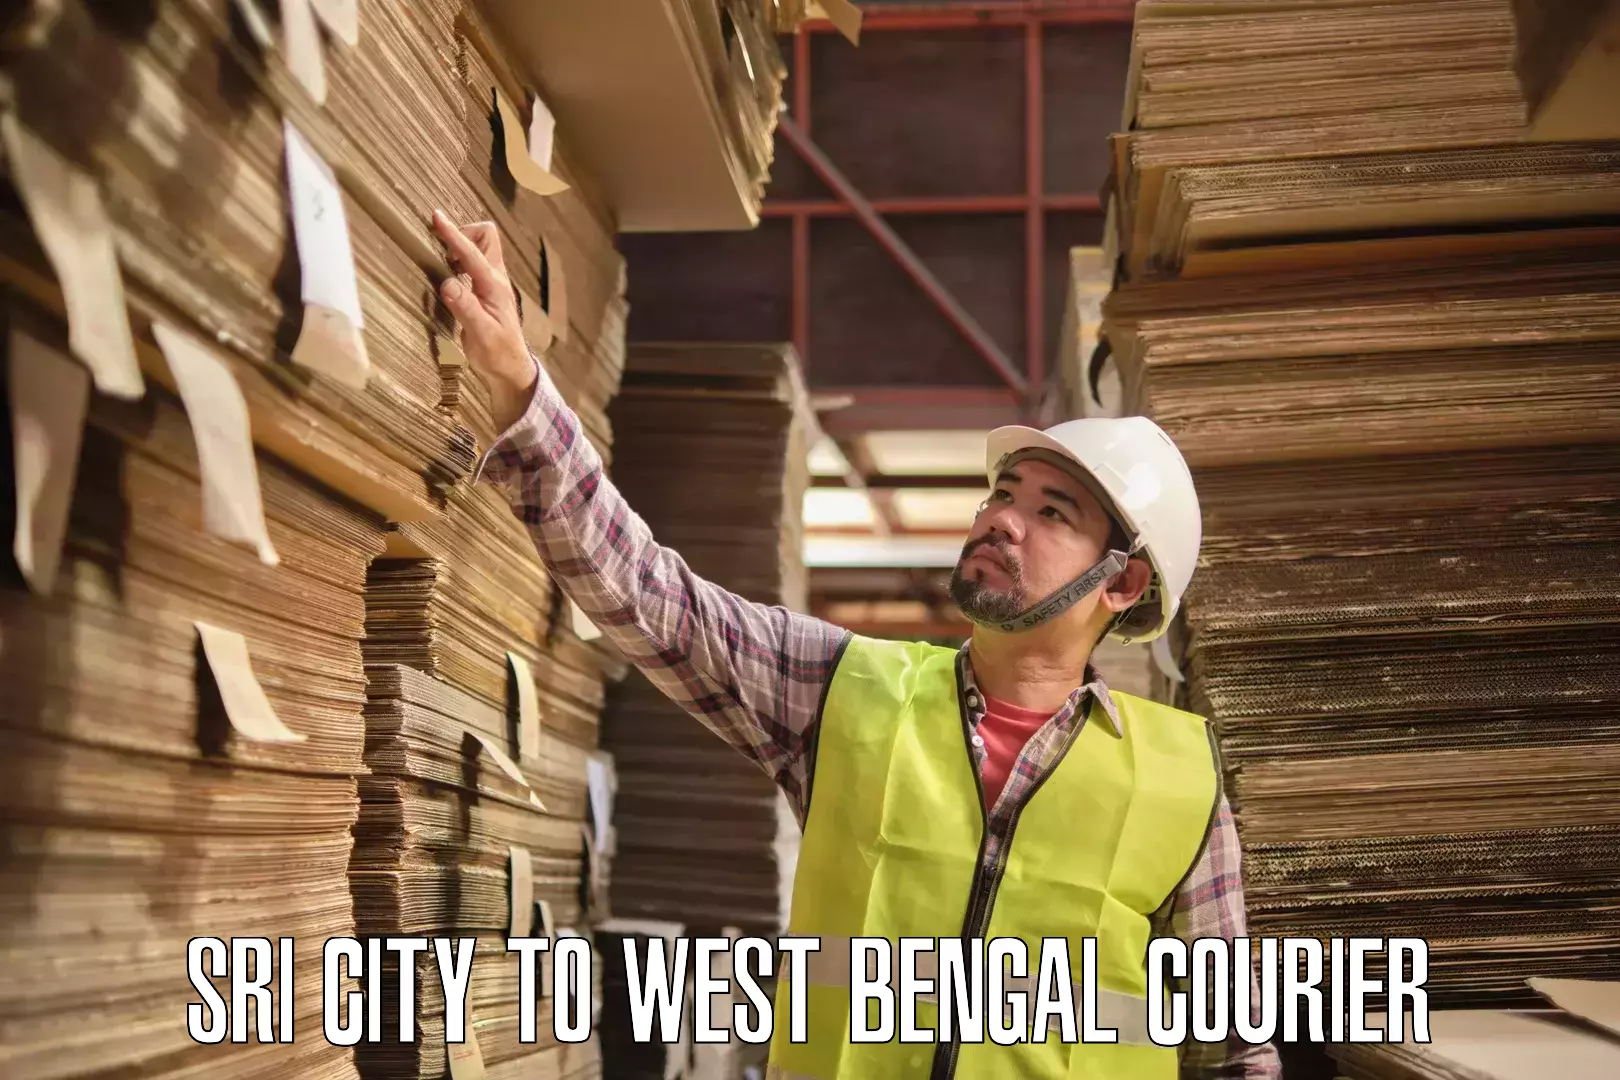 Reliable delivery network Sri City to West Bengal